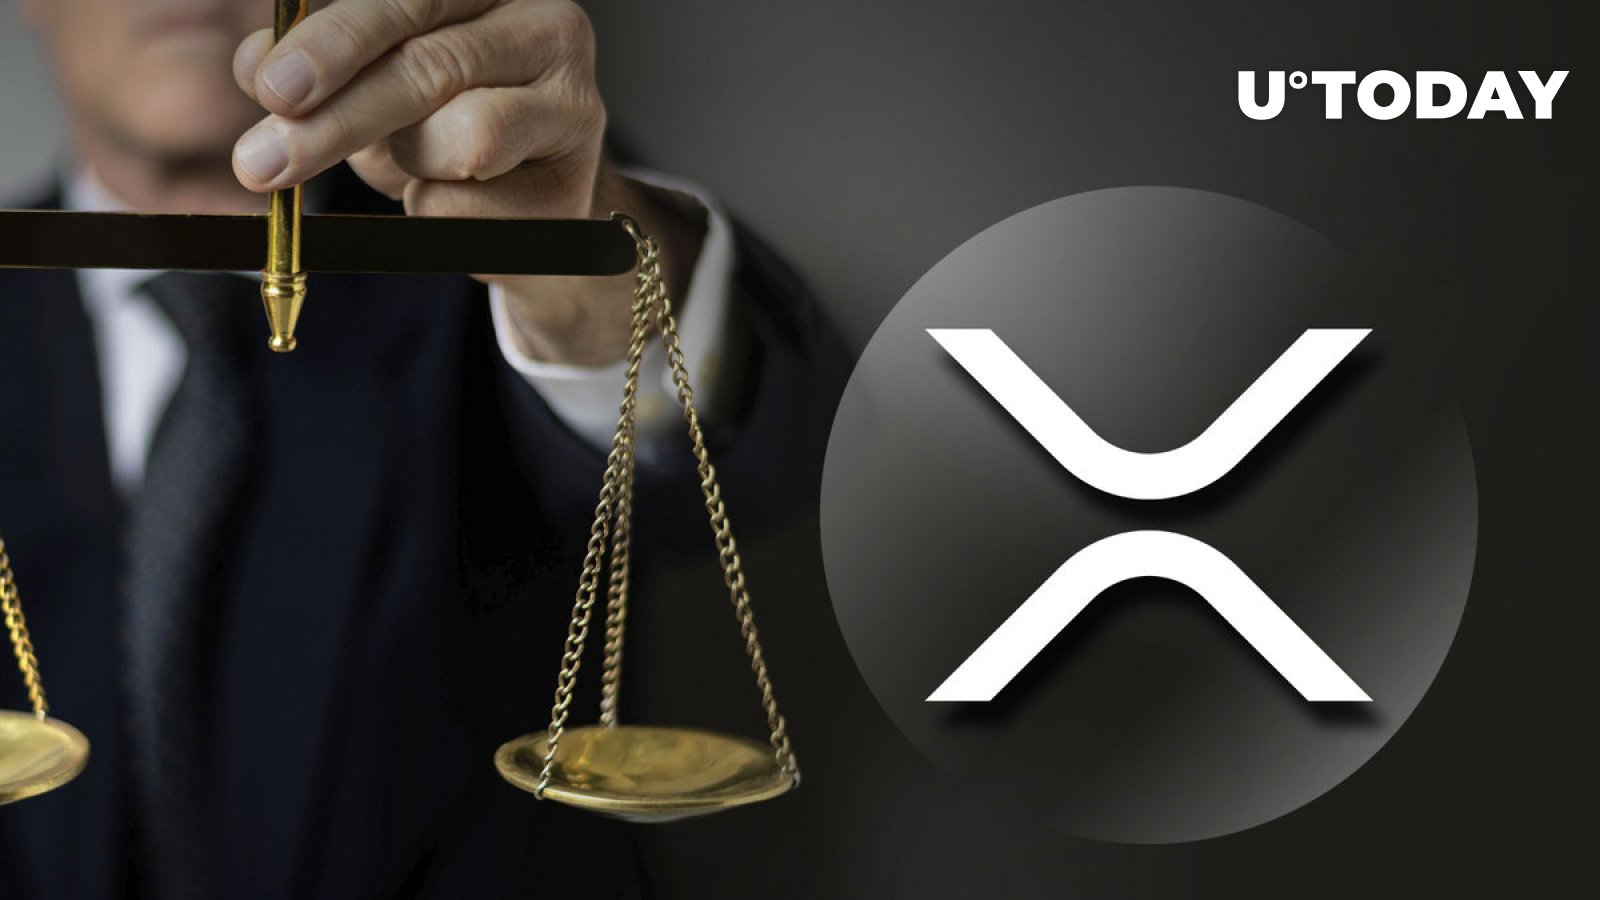 xrp-community-reacts-to-bill-clarifying-regulatory-classification-of-digital-assets